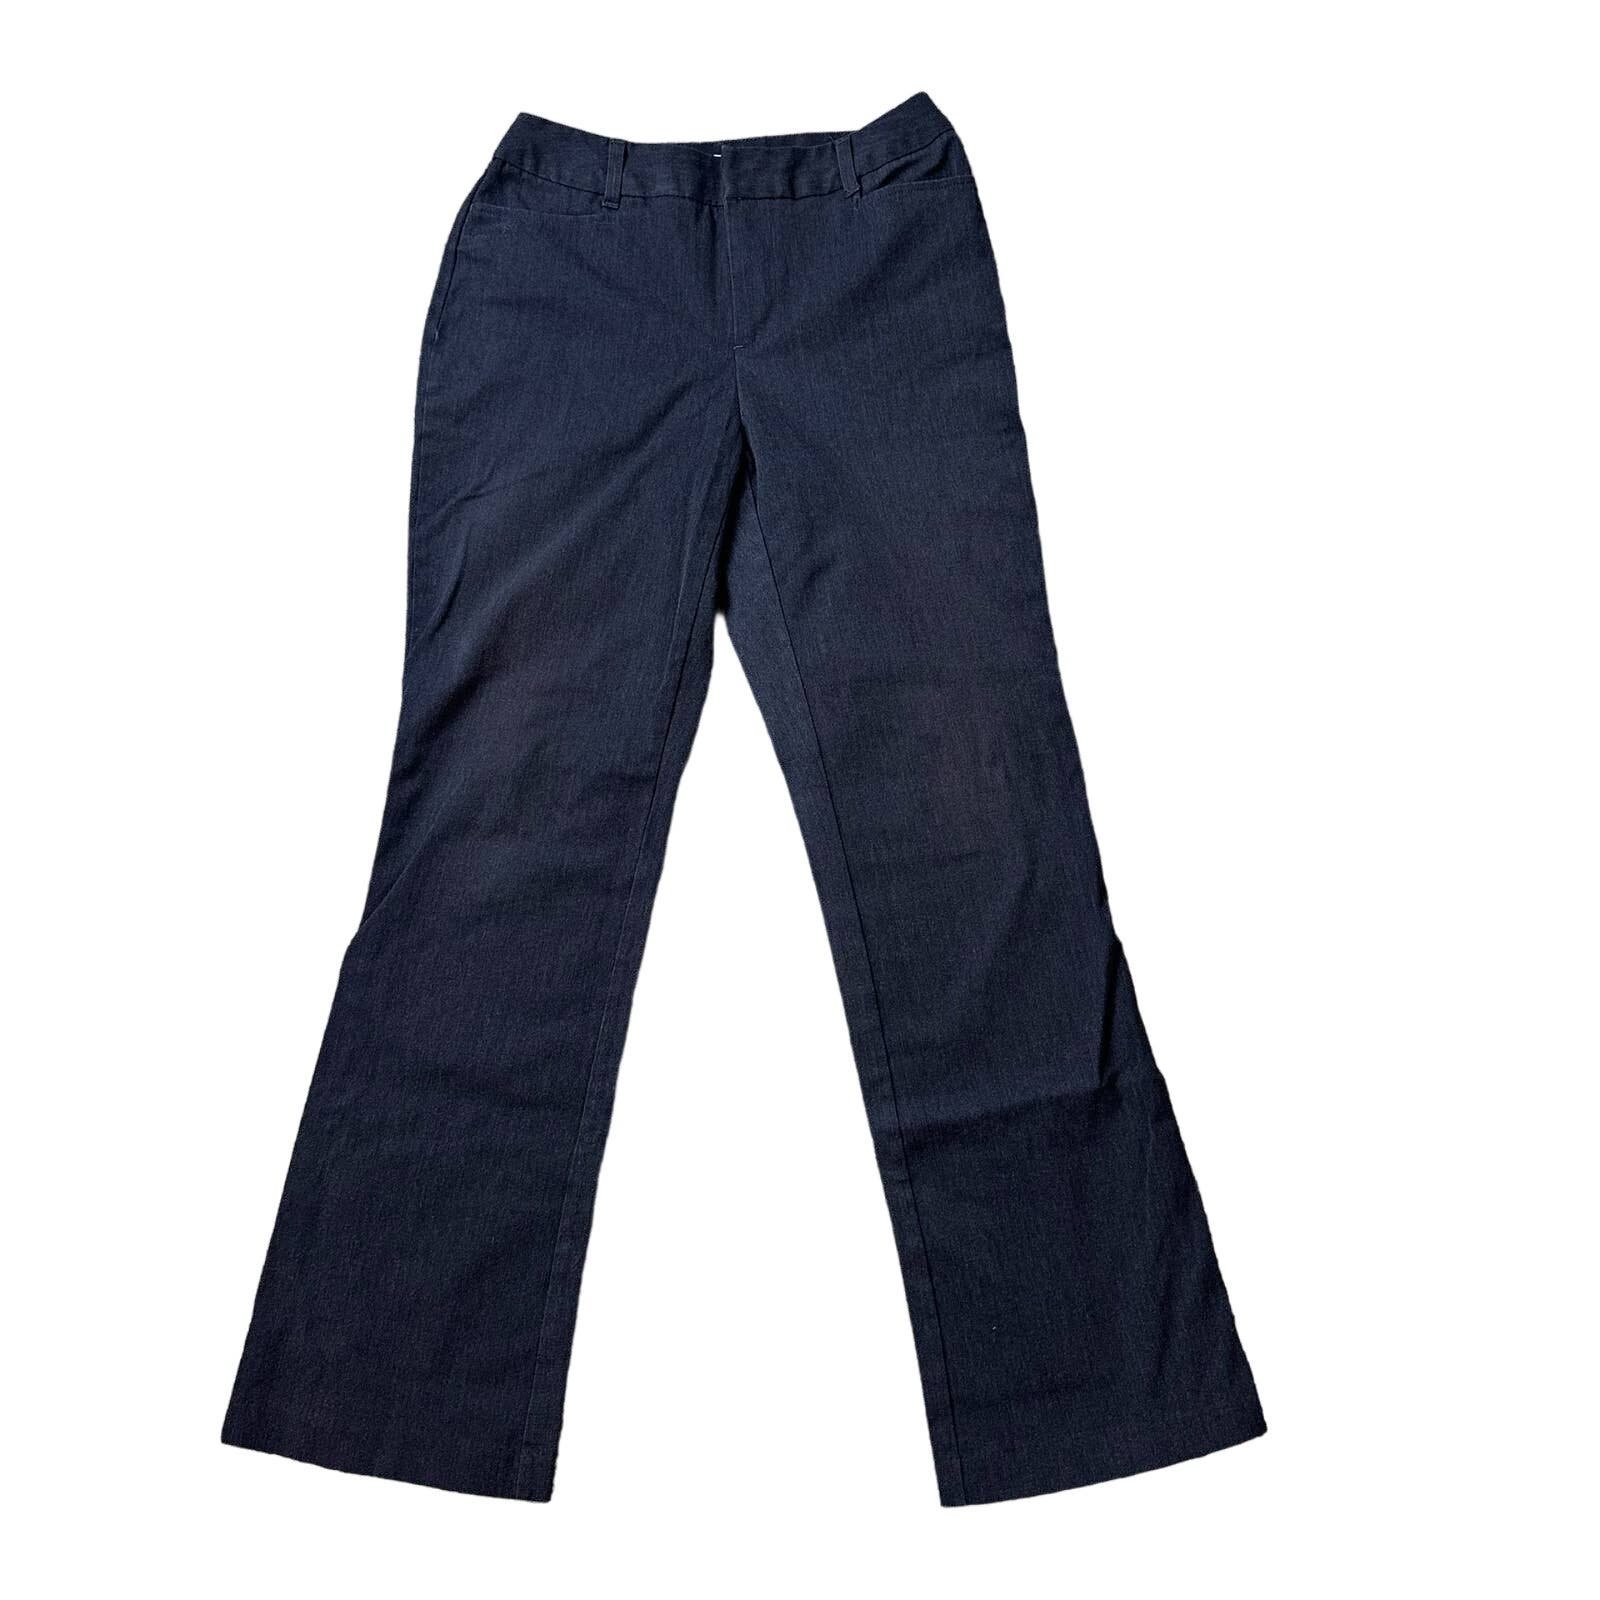 Discounted St. John´s Bay Gray Work Pants Trousers